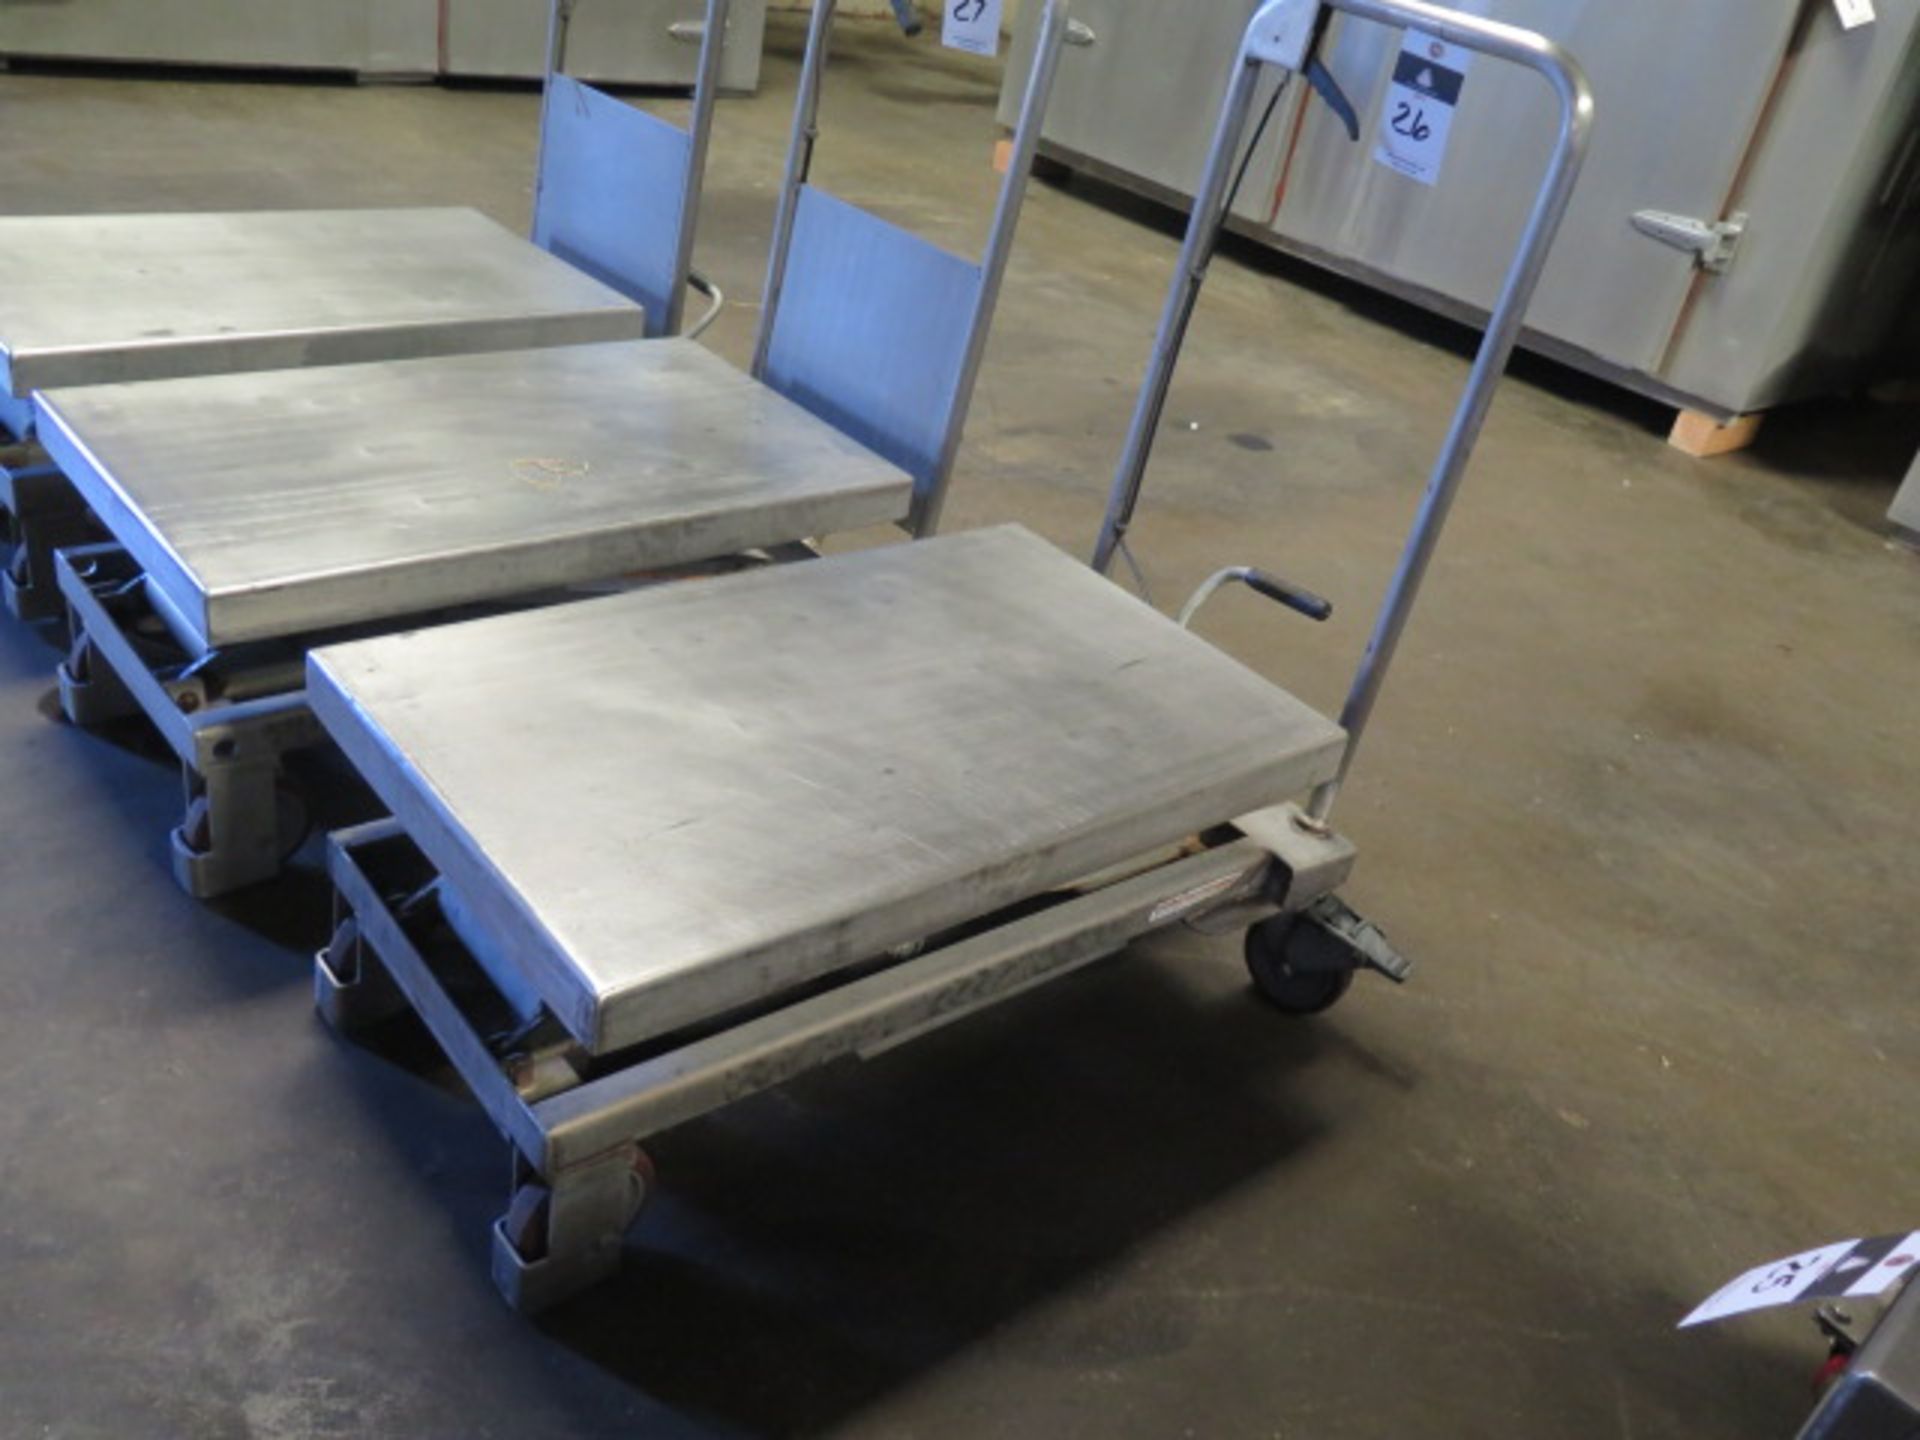 Stainless Steel Hydraulic Lift Cart - Image 2 of 2